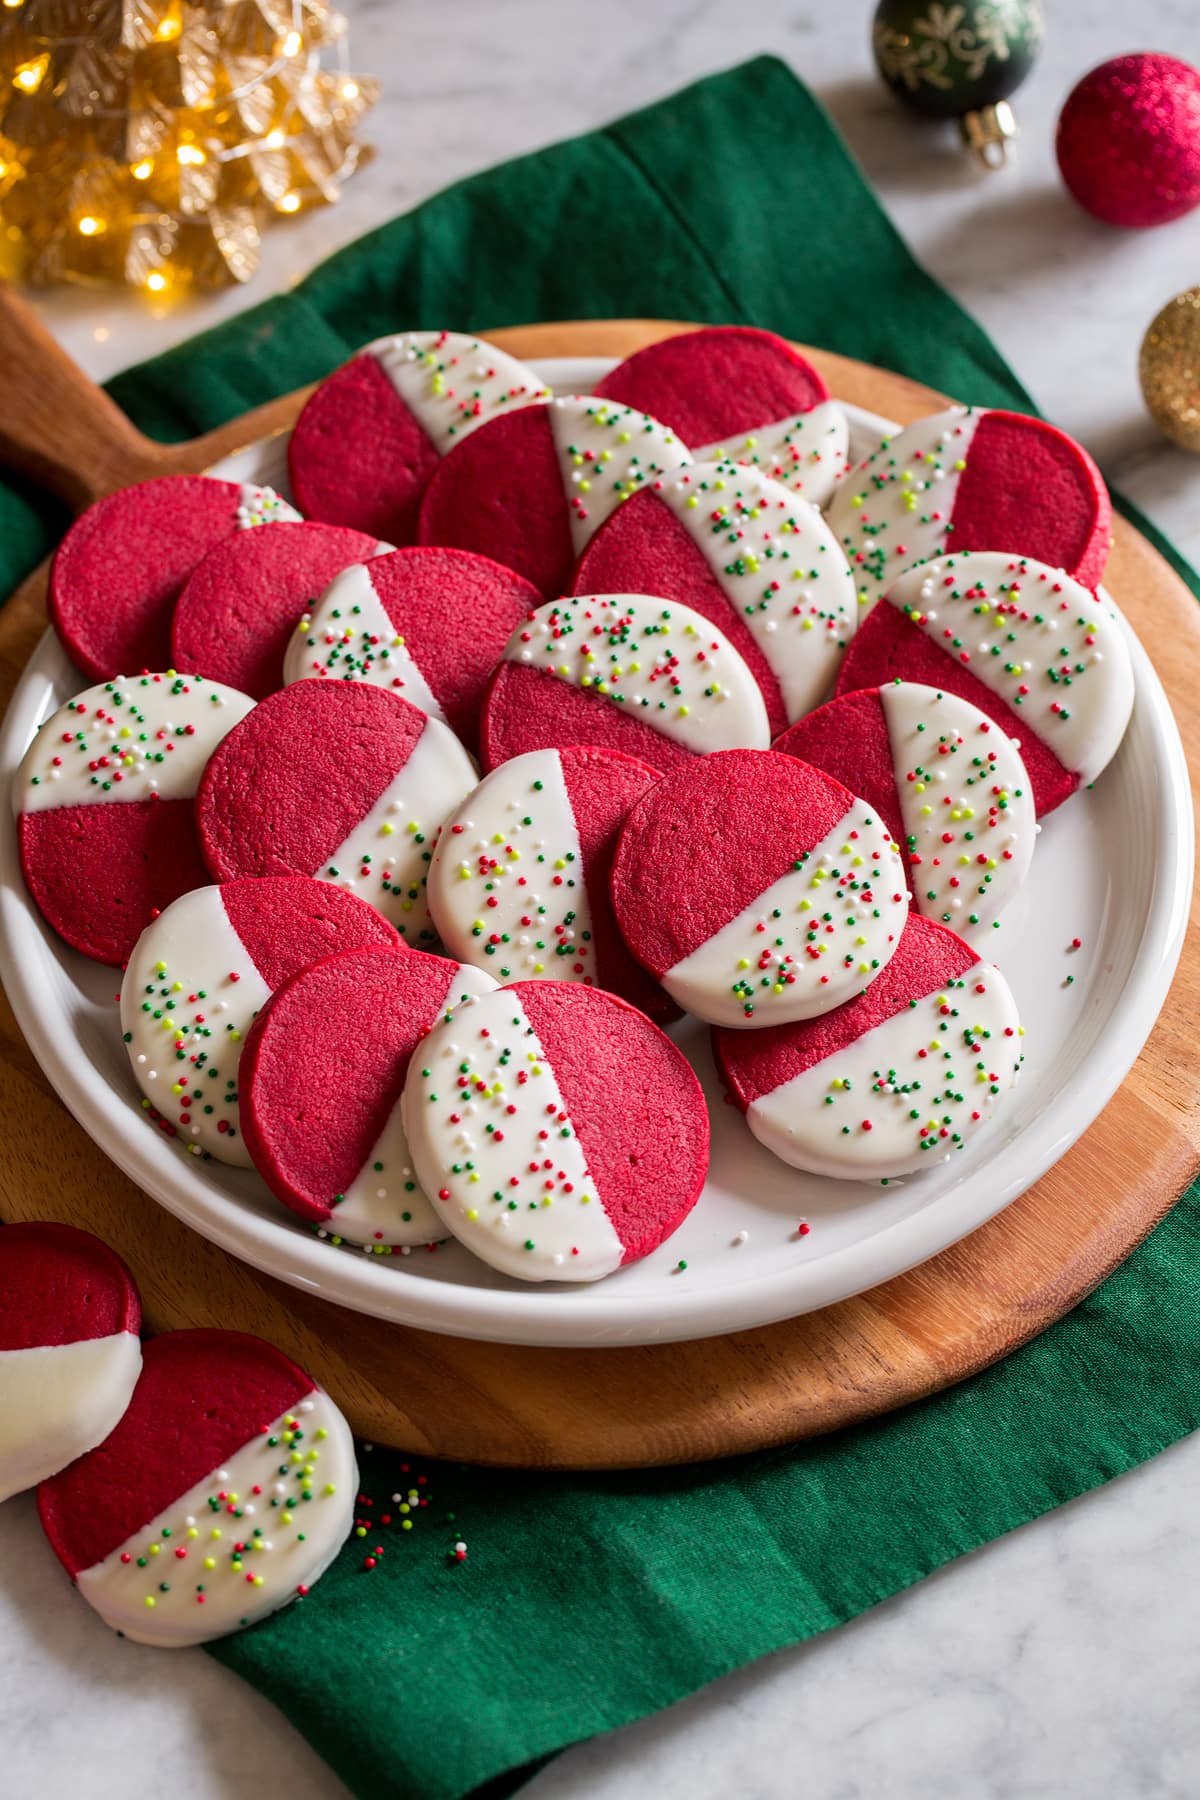 Red velvet shortbread Christmas cookies shown piled on a white serving plate over a wooden platter and a rich green cloth.